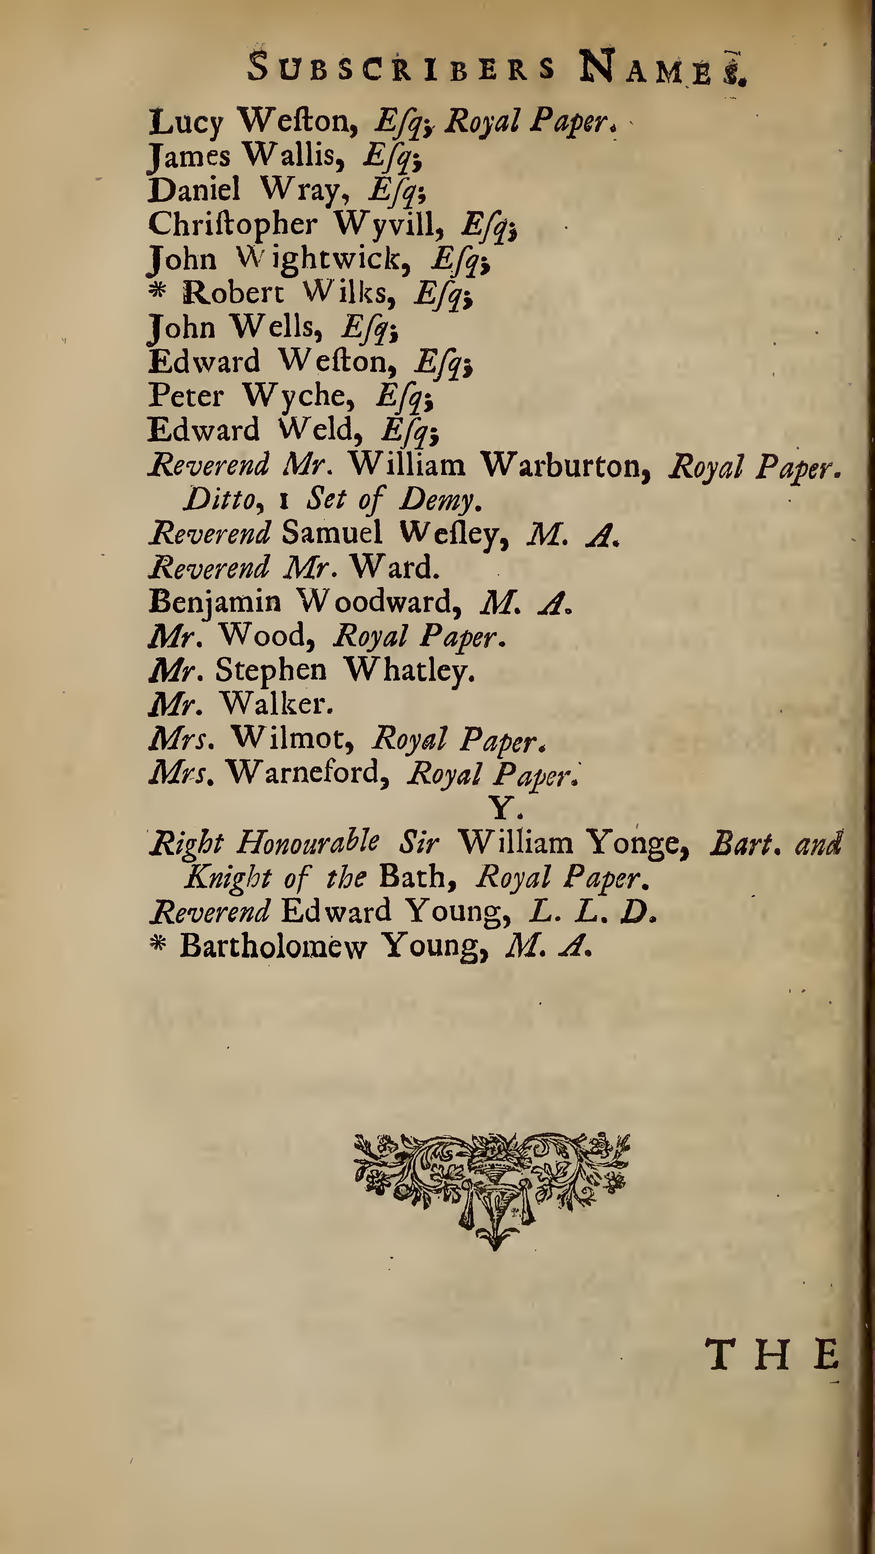 Image of page 100